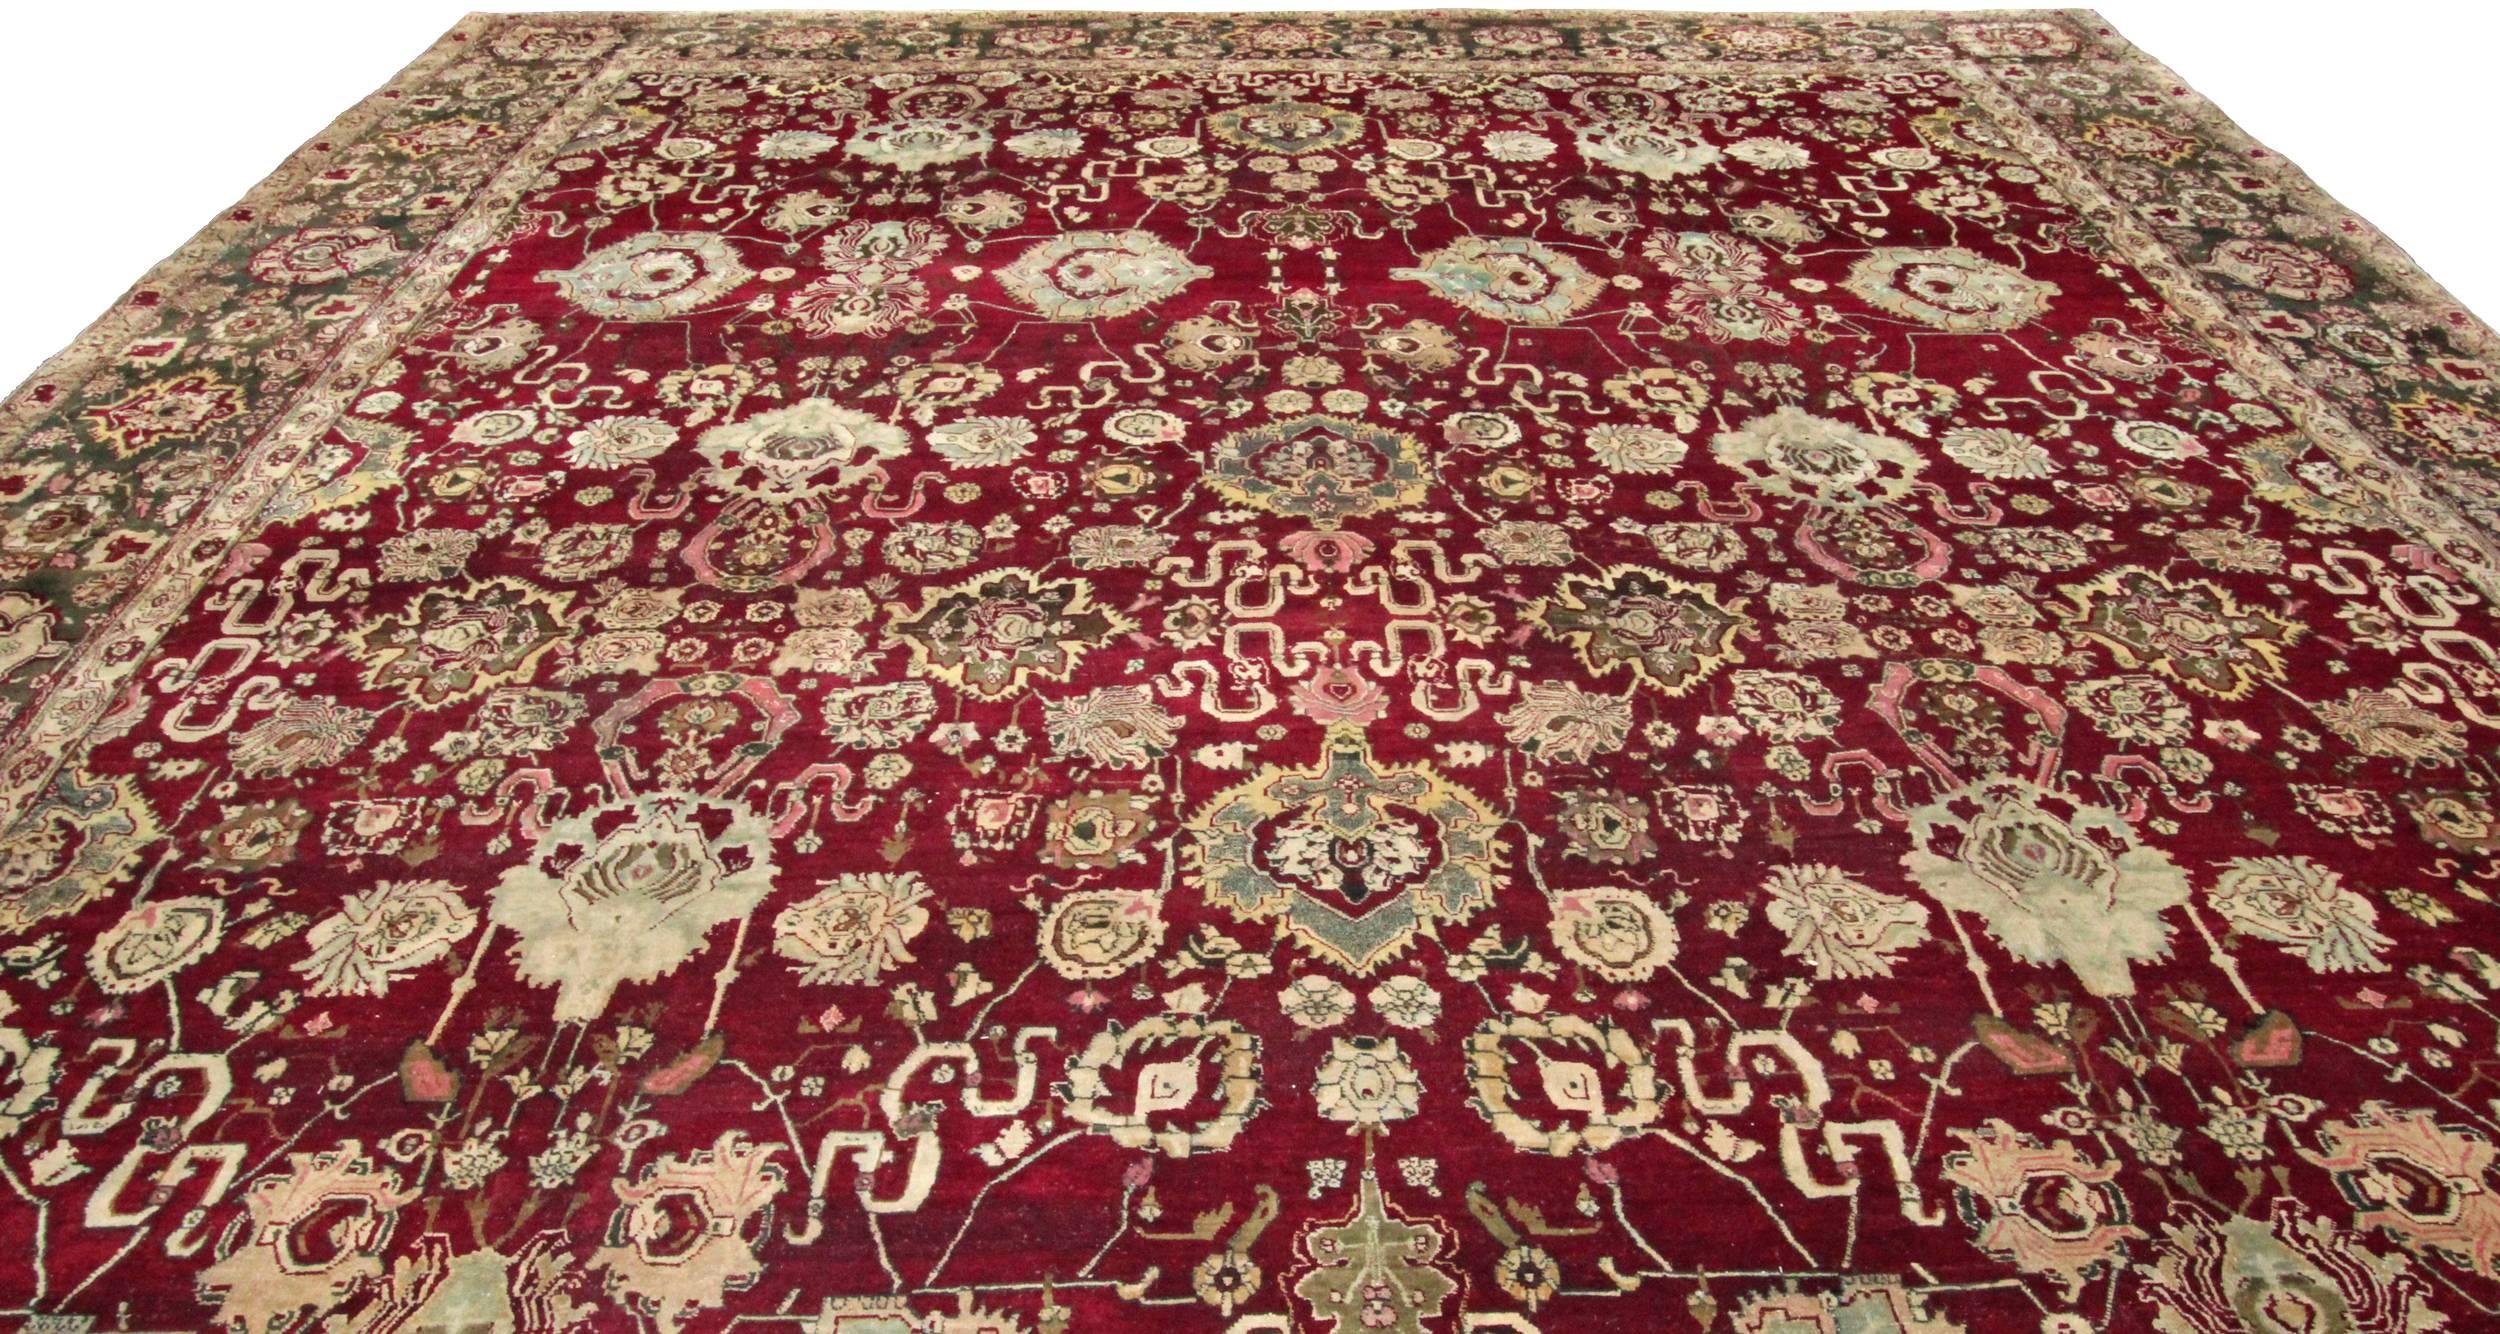 An extremely rare large antique Agra carpet in remarkable condition. Woven with a deep burgundy background and a rare green border. A truly magnificent carpet woven in Agra in India around 1870. The brown dye on this carpet has corroded showing an